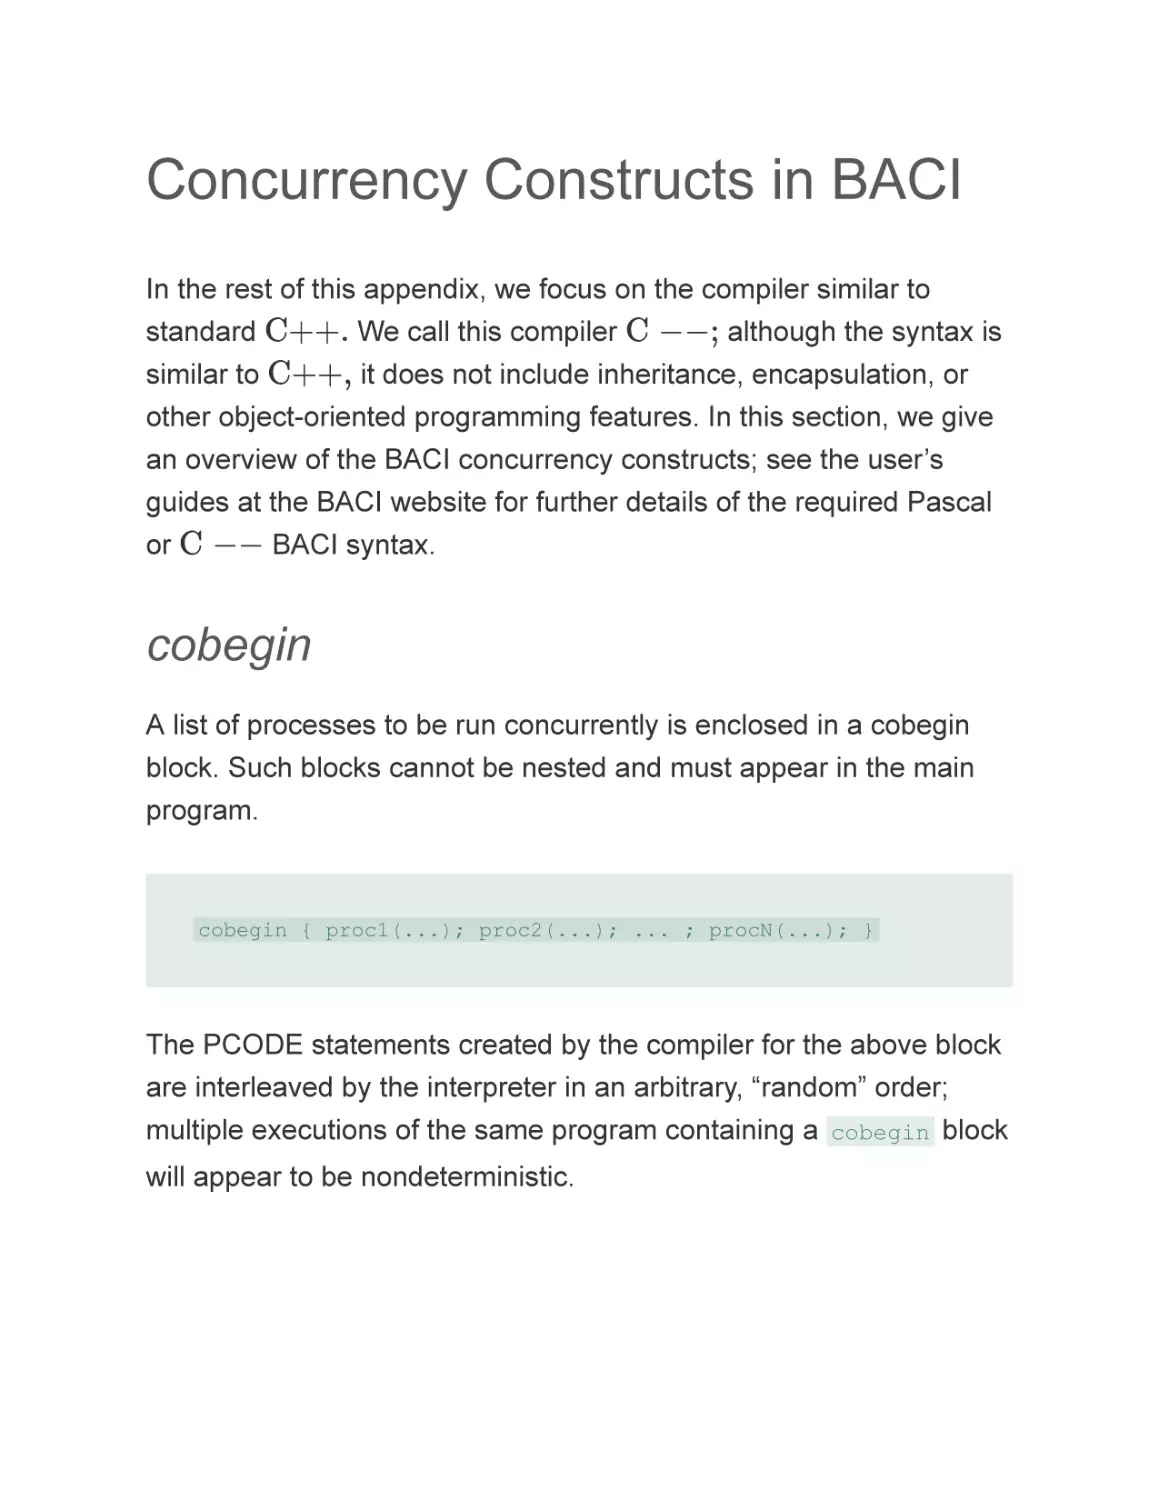 Concurrency Constructs in BACI
cobegin